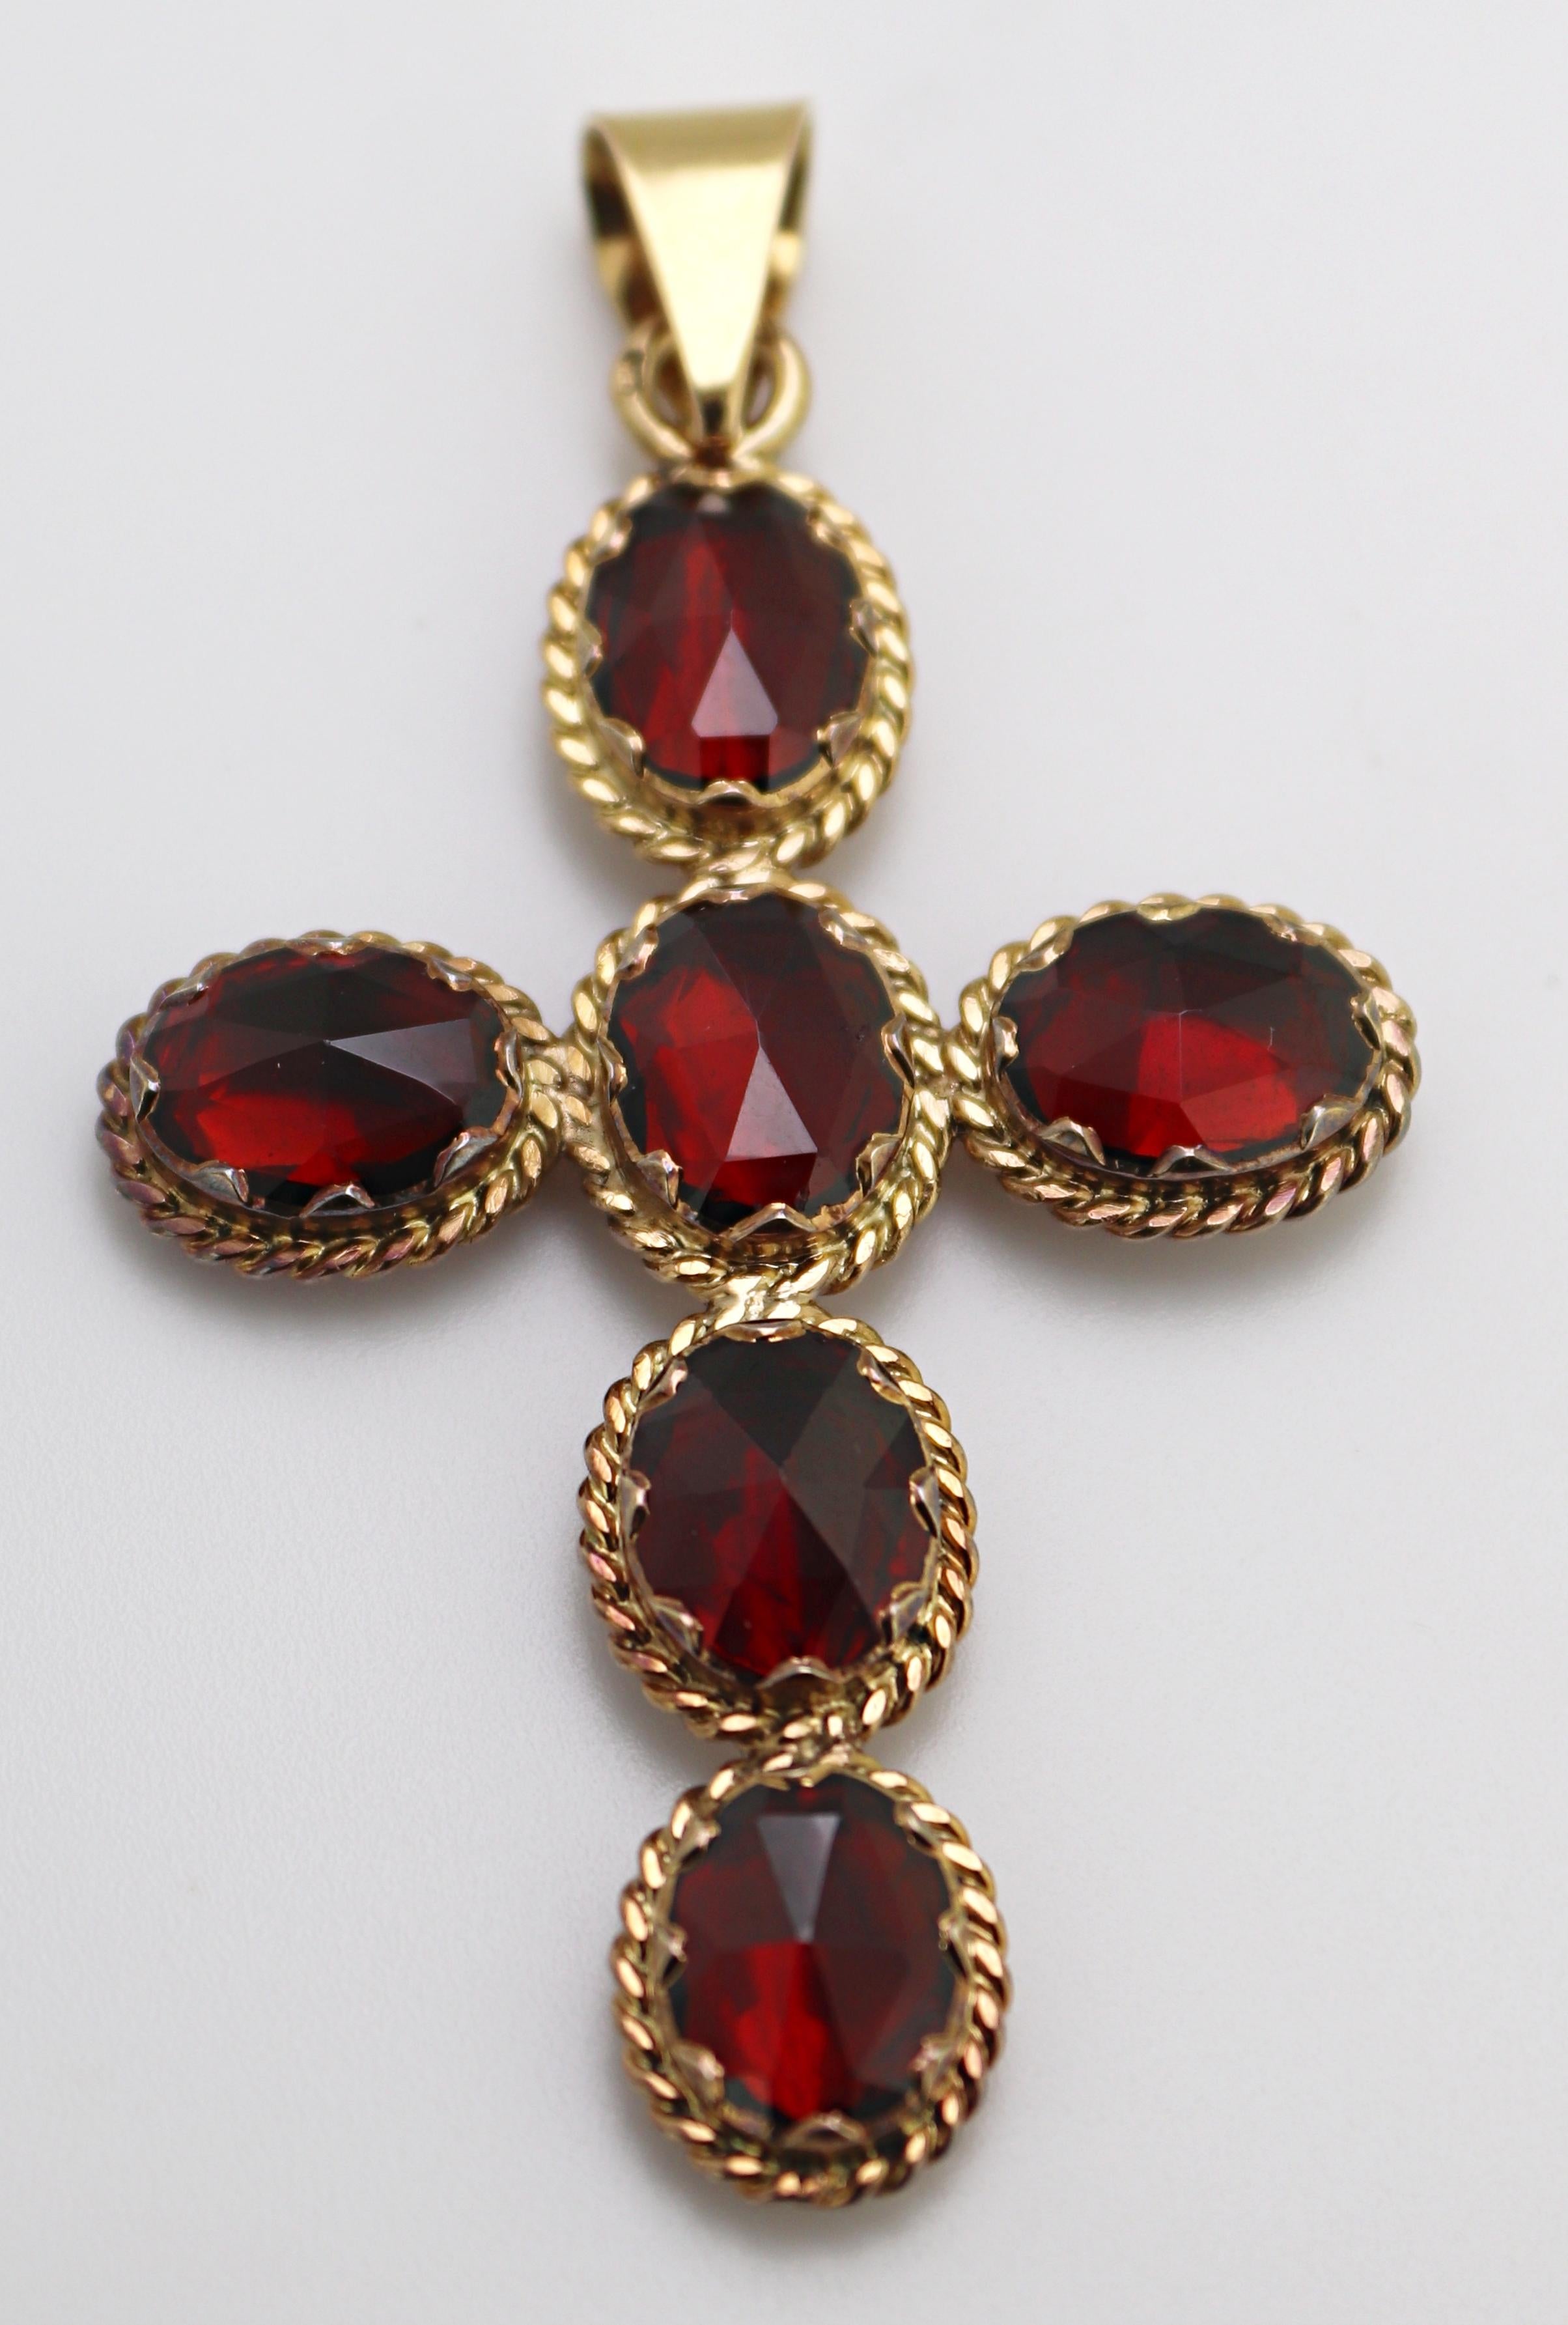 Featuring (6) rose-cut oval rhodolite garnets, 9.5 X 7.4 mm, each collet set
and foil backed in an 18k yellow gold cross mounting, 57.9 X 32 X 4.8 mm,
marked with French 18k hallmark, MC, Gross Weight 6.50 grams.